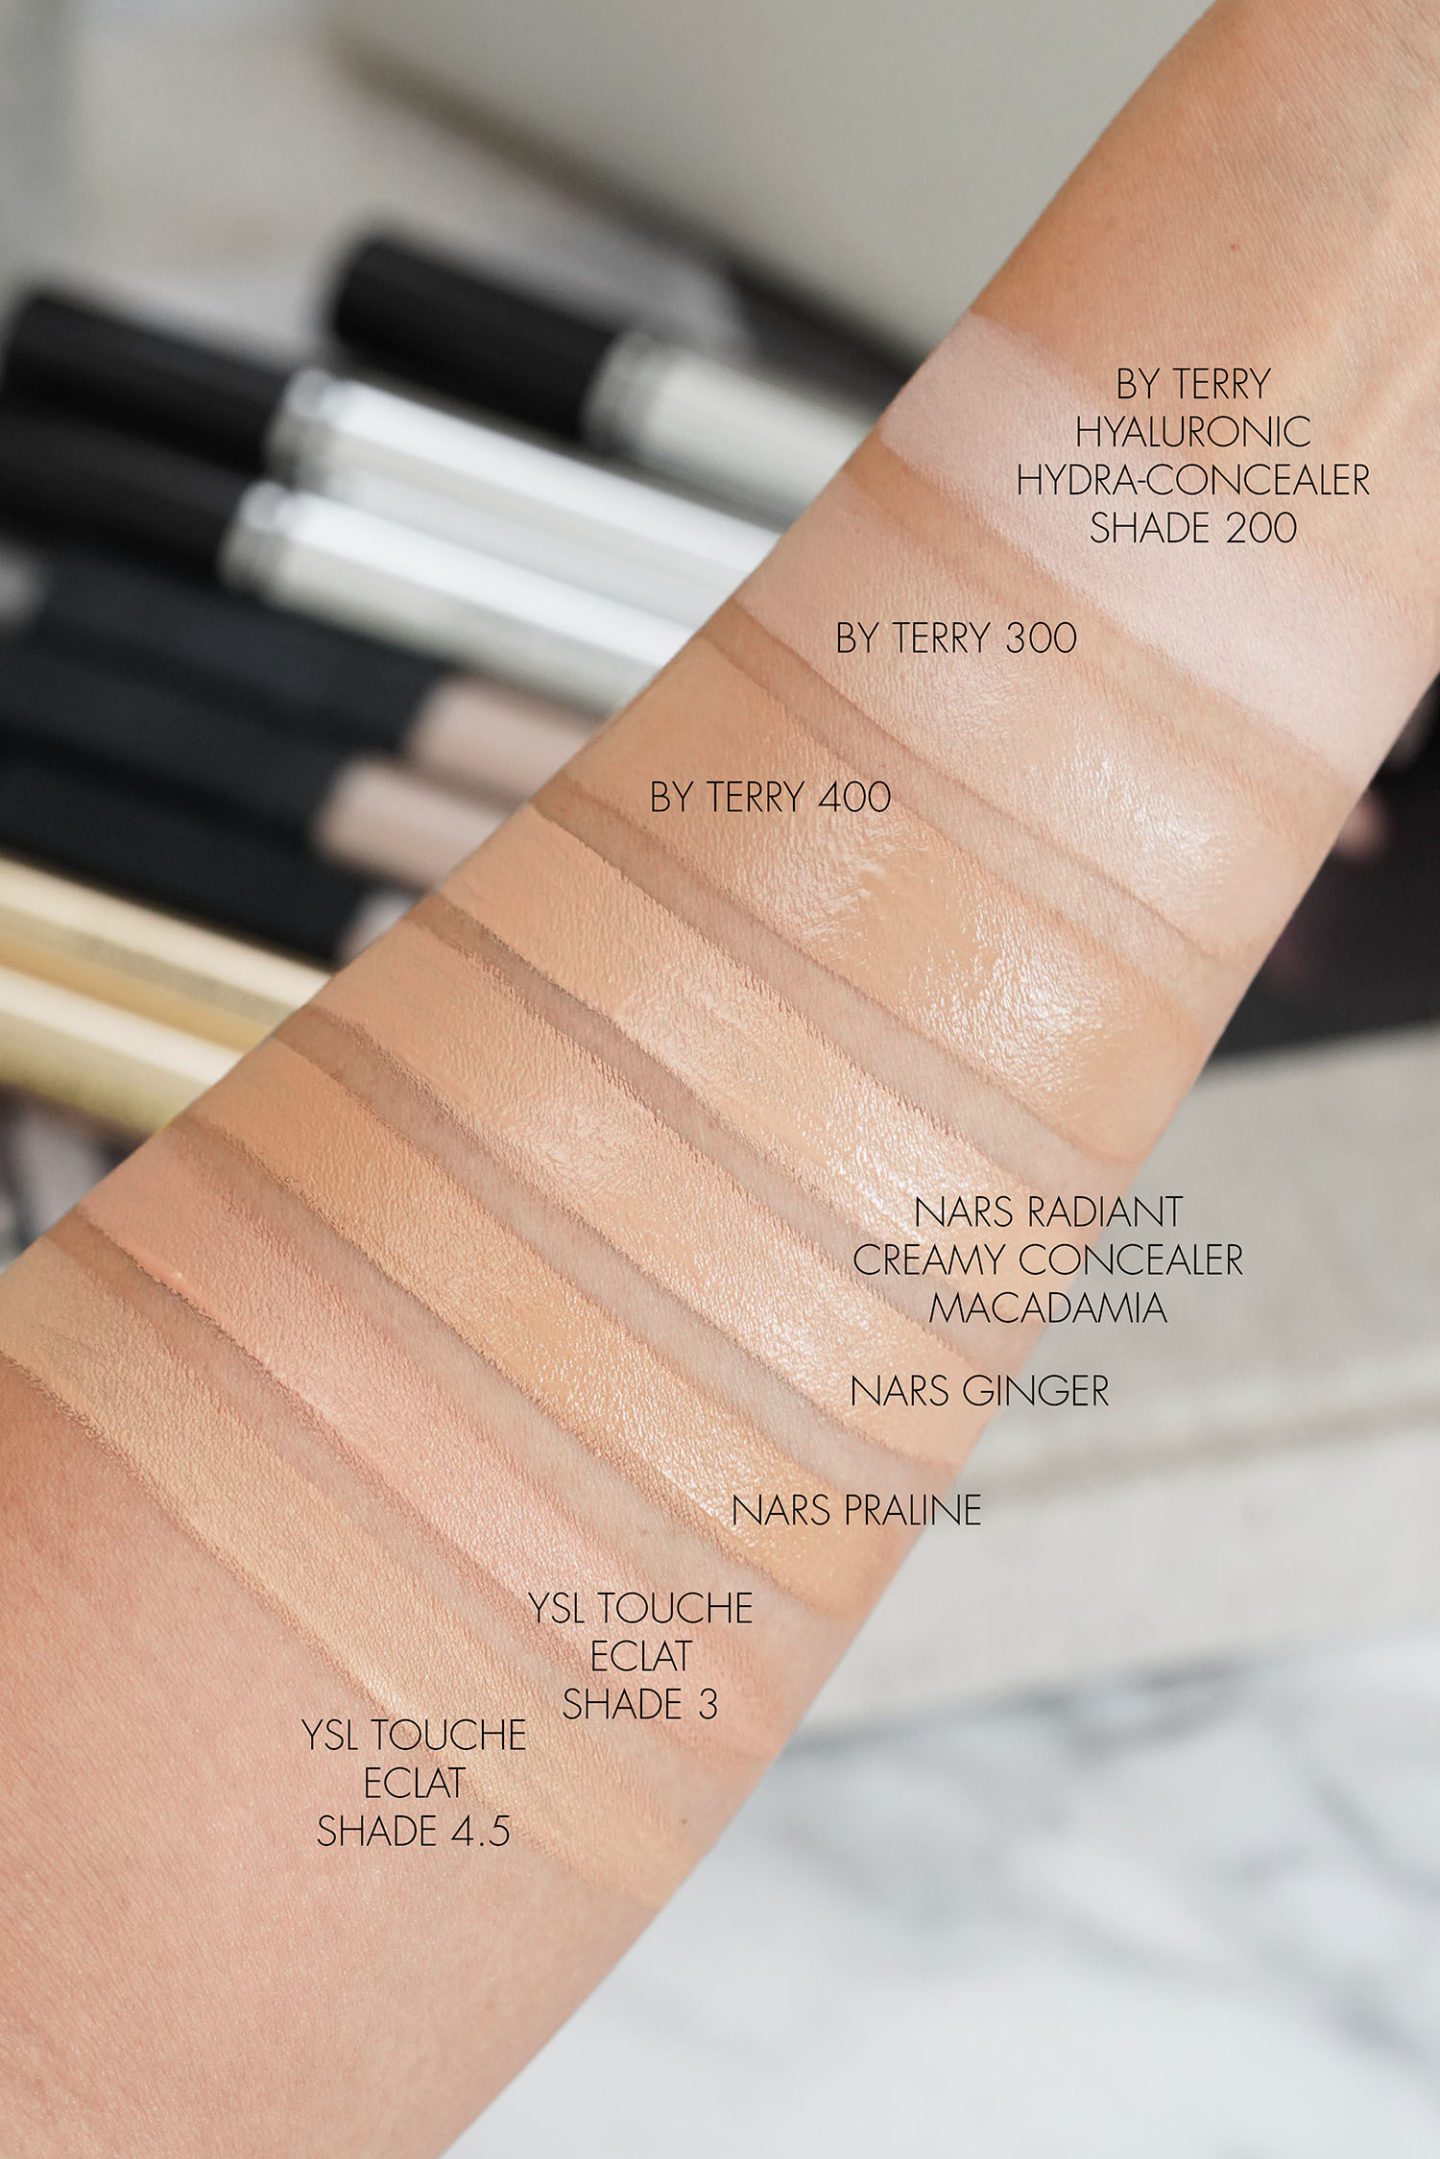 Concealer Swatches By Terry, NARS Macadamia, Ginger, YSL Touche Eclat 3 and 4.5